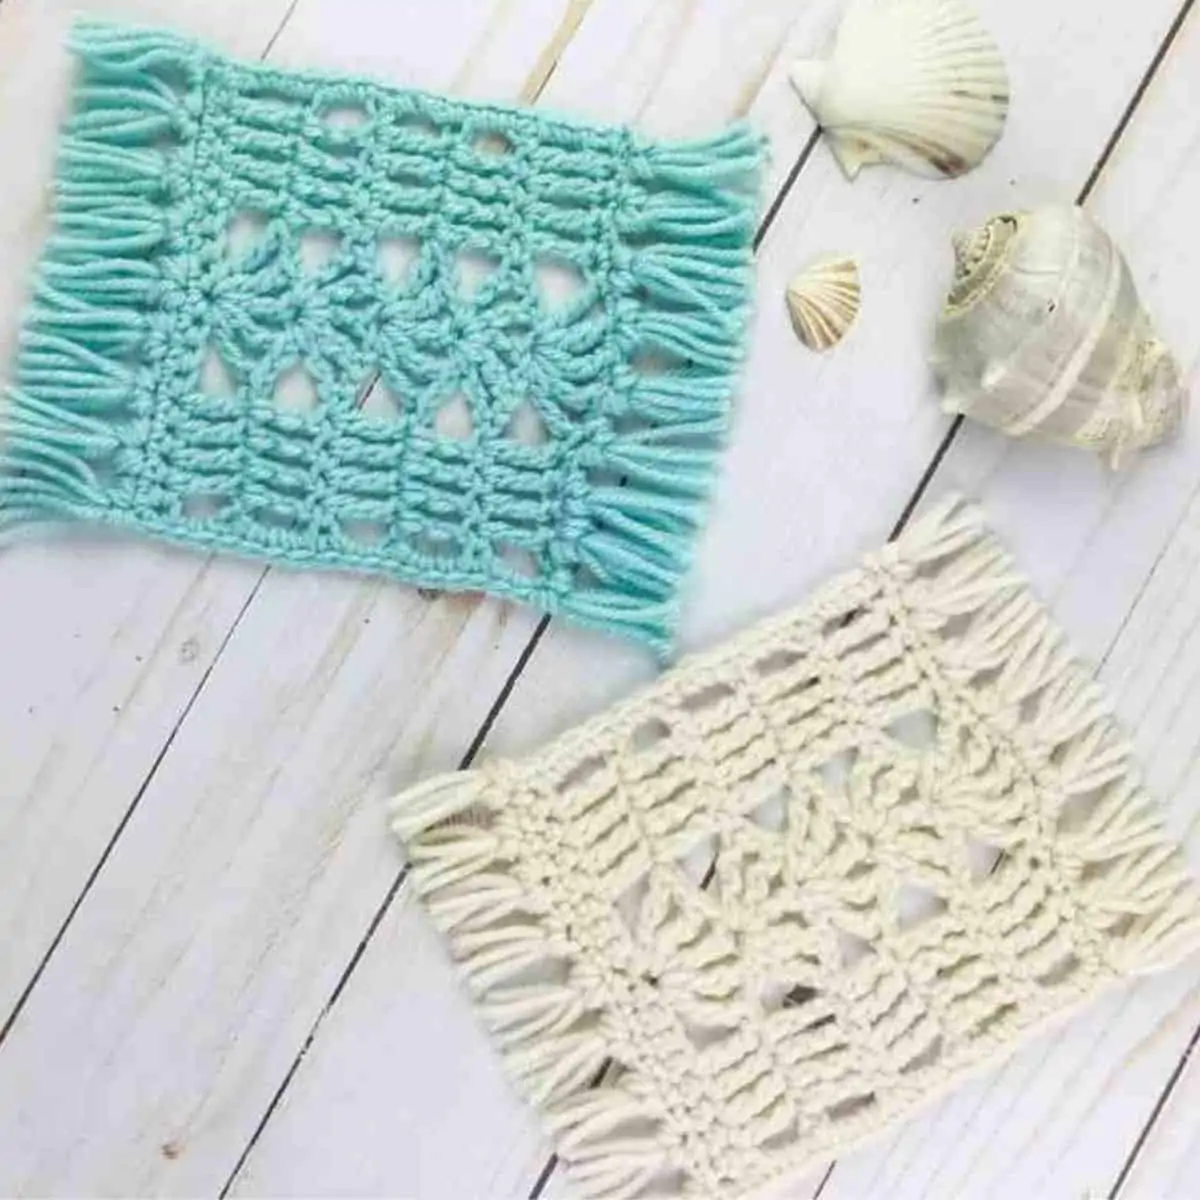 beachy and lacy coasters crocheted next to seashells